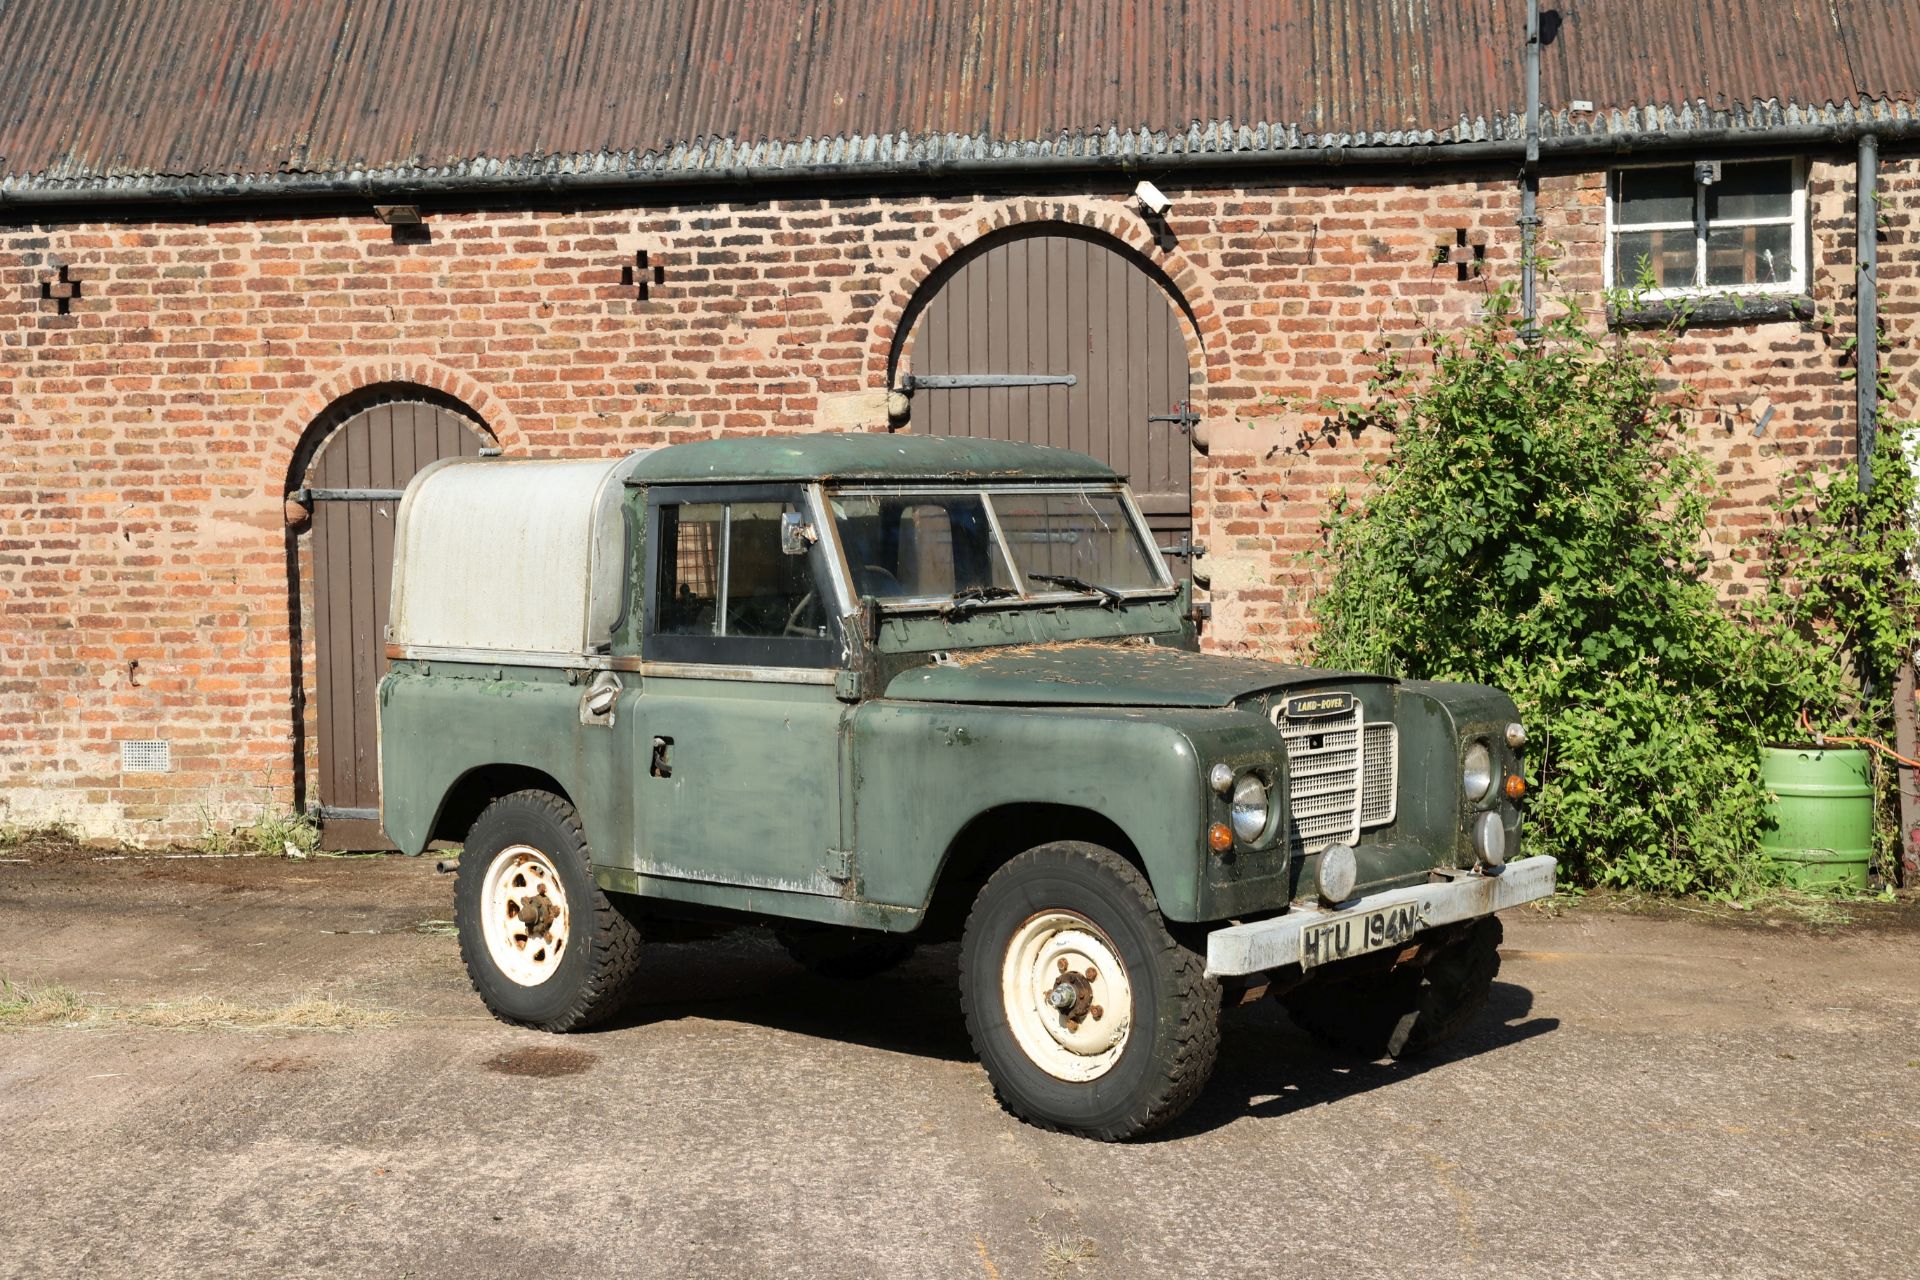 1975 Land Rover Series III 88' Chassis no. 90112877A